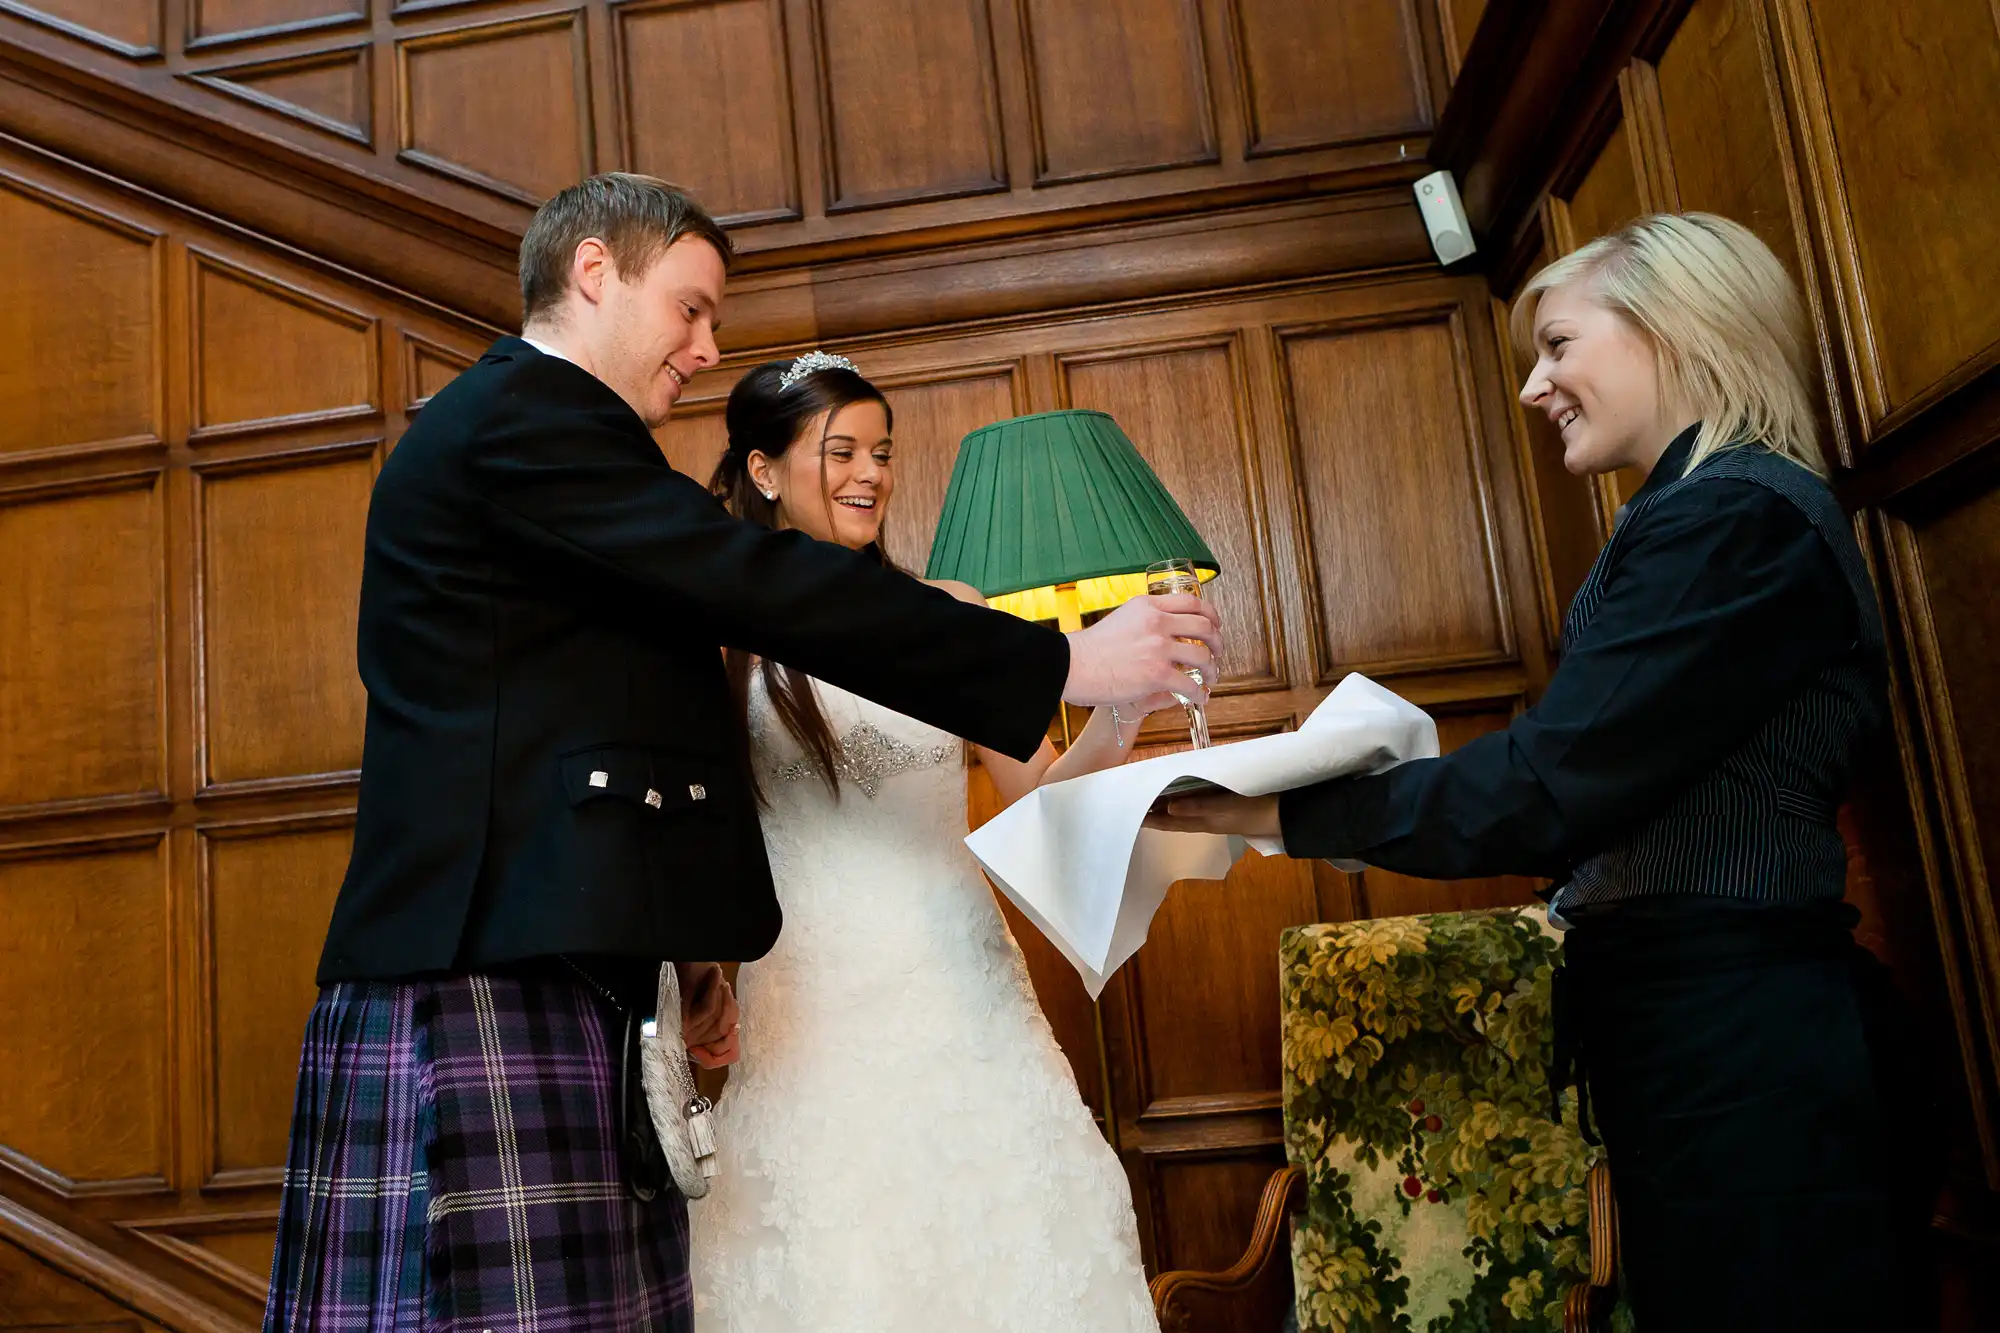 A bride and groom in a kilt and white dress laugh while signing their marriage certificate, handed by a smiling female officiant in a dark suit.